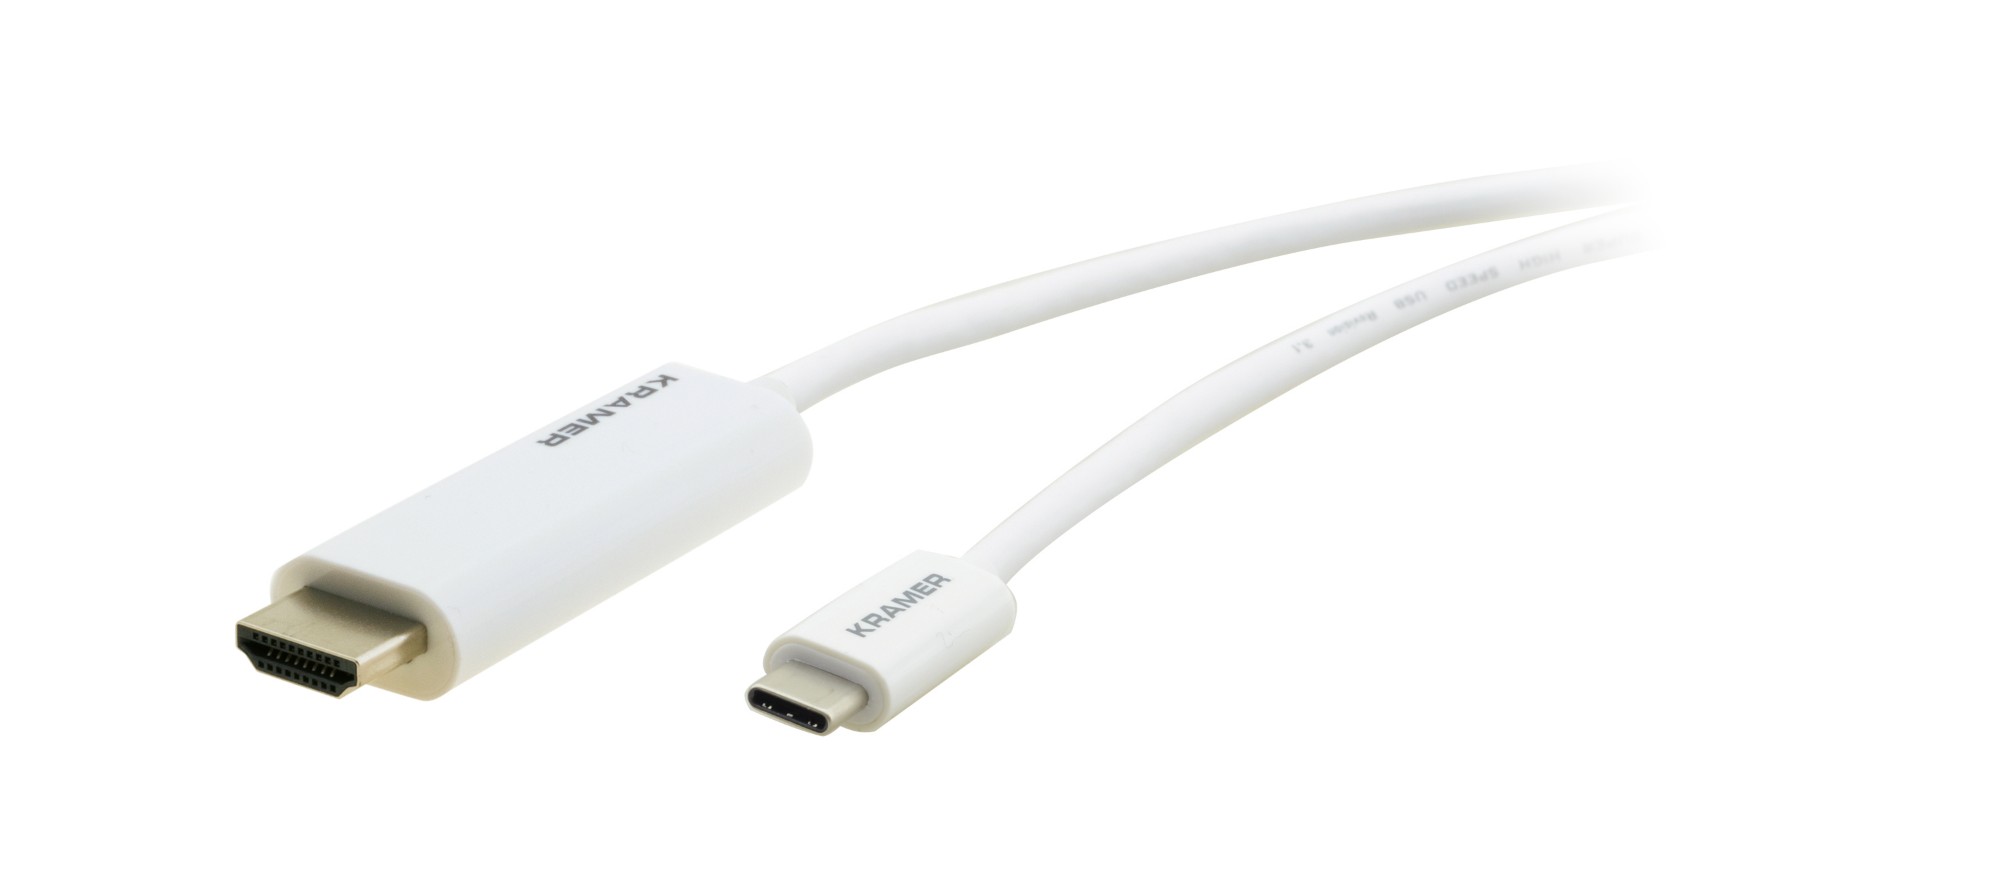 Photos - Cable (video, audio, USB) Kramer Electronics C-USBC/HM10 video cable adapter 3 m USB Type-C HDMI 